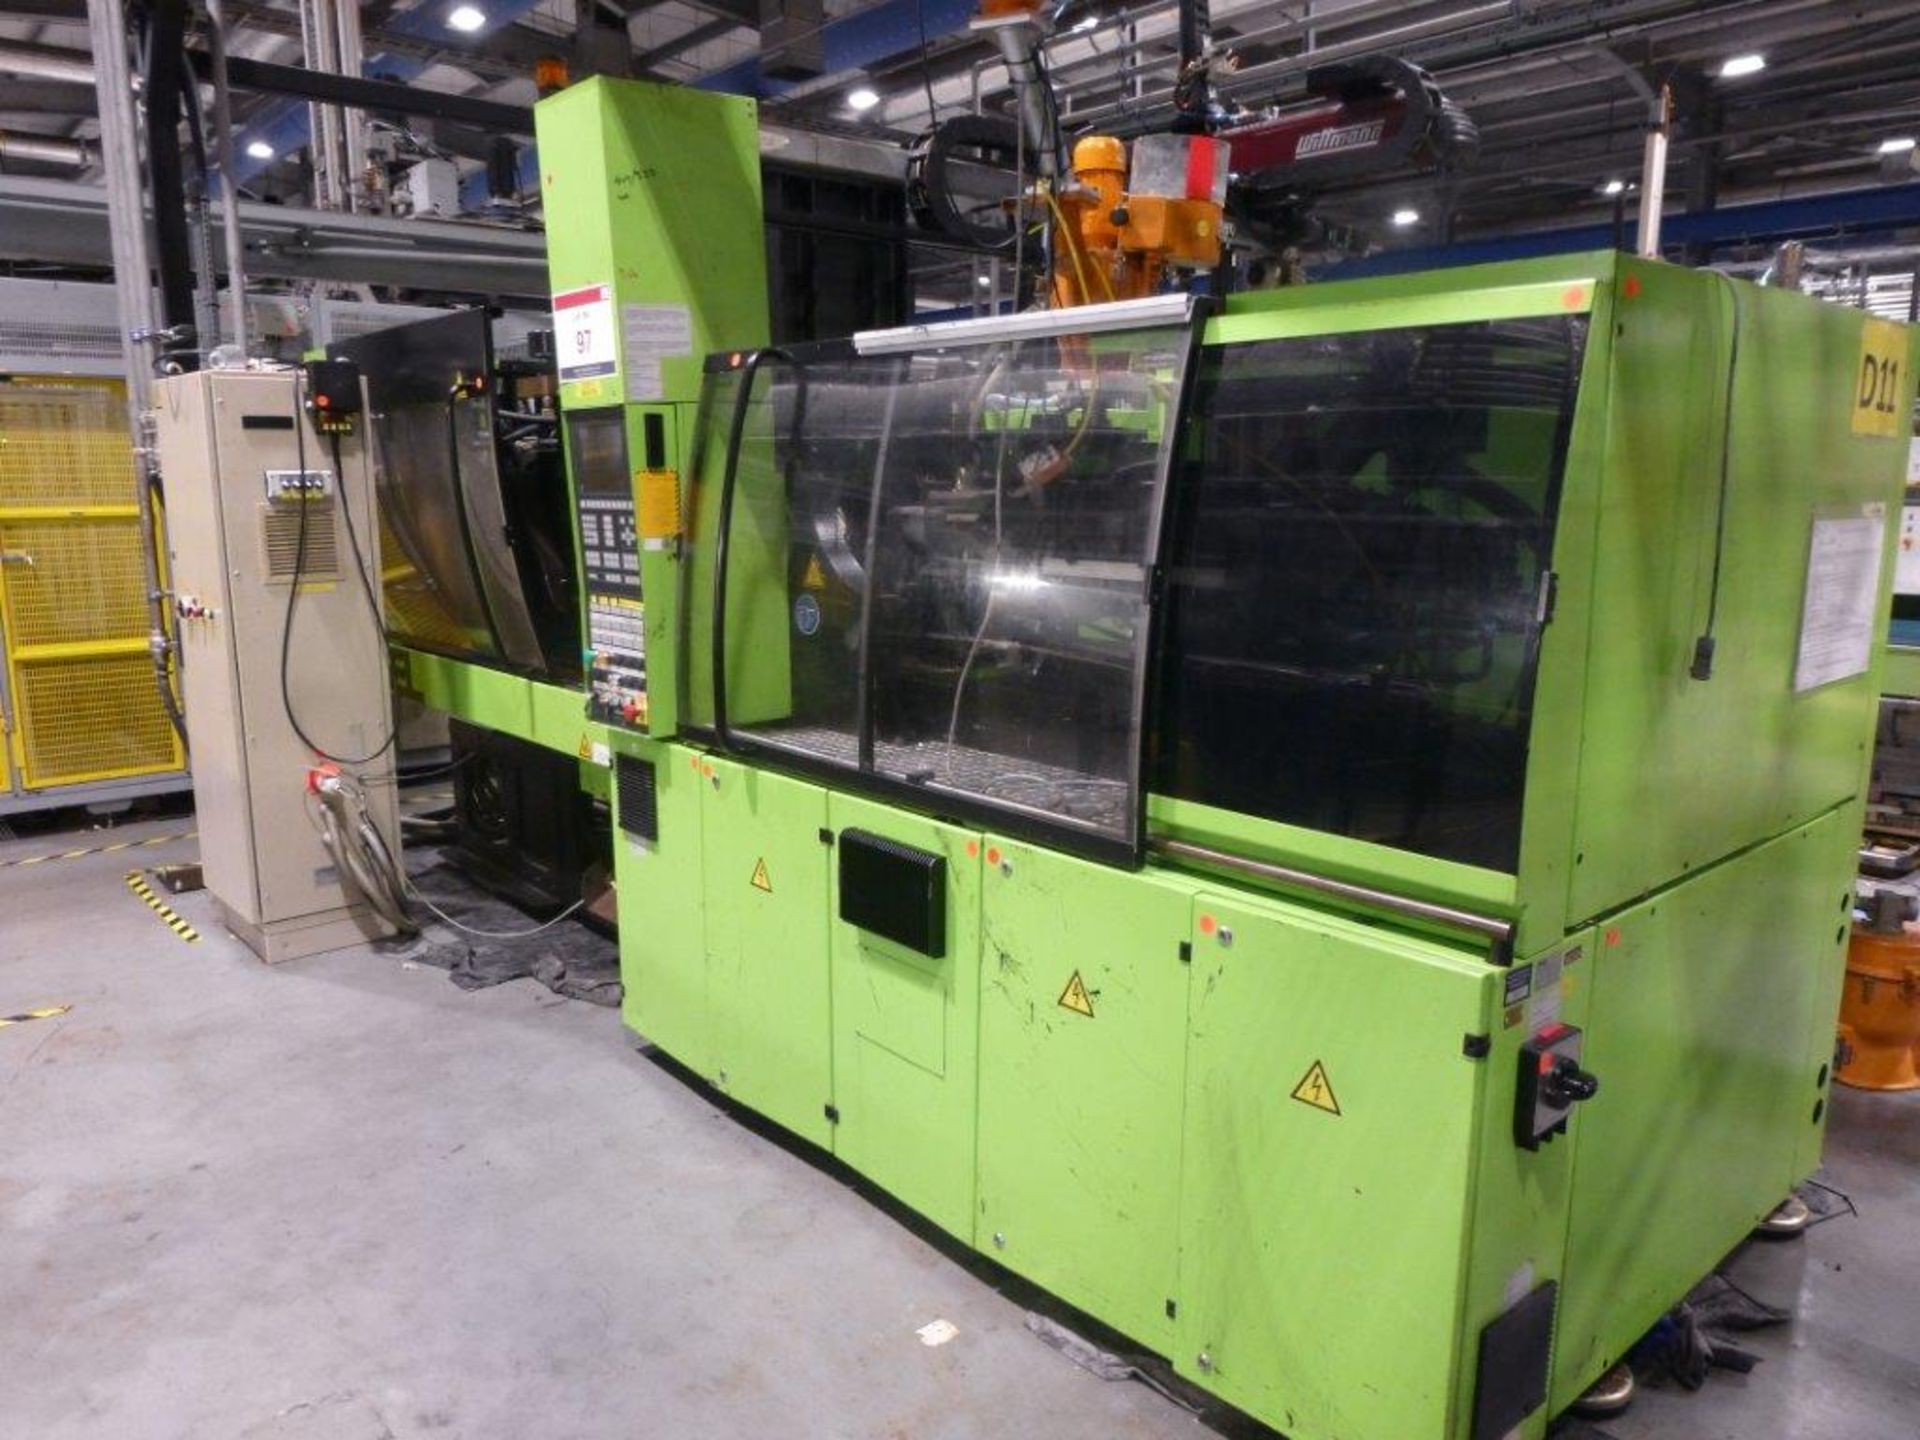 Engel Victory 500/150 Tech CNC Plastic Injection Moulding Machine Serial No. 46973 (2002) with - Image 2 of 8